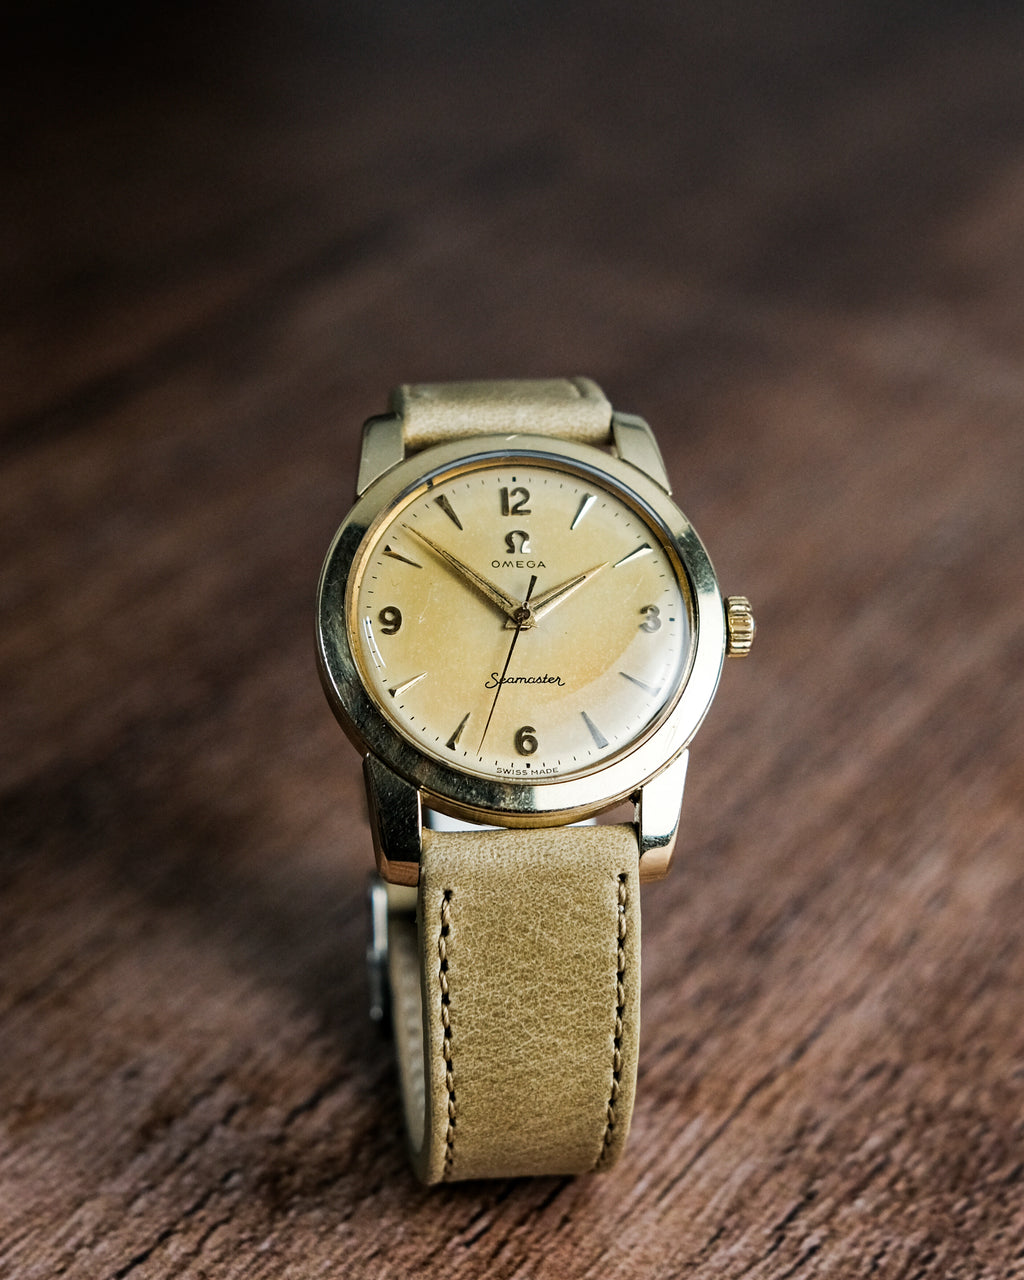 Omega Seamaster handwound reference 2759 from 1954 – Perpetual Watch Lover  (PWL)